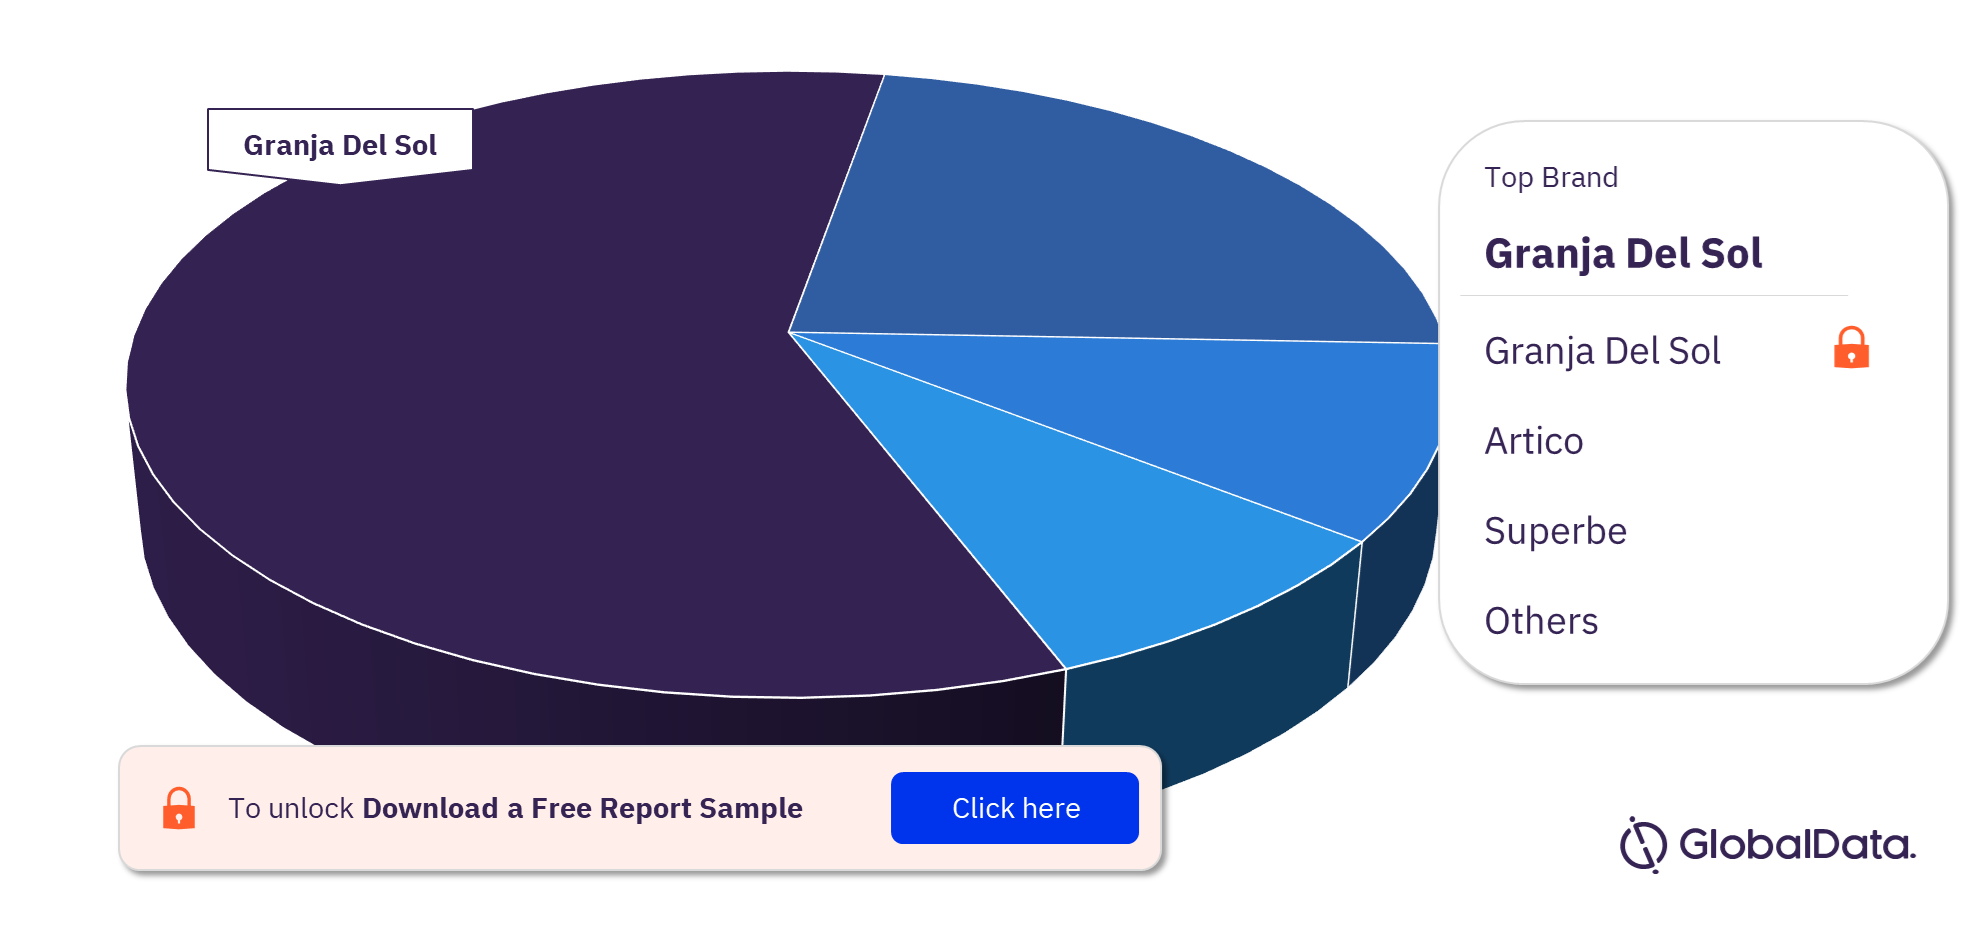 Argentina Frozen Fish and Seafood Market Analysis, by Brands, 2021 (%)